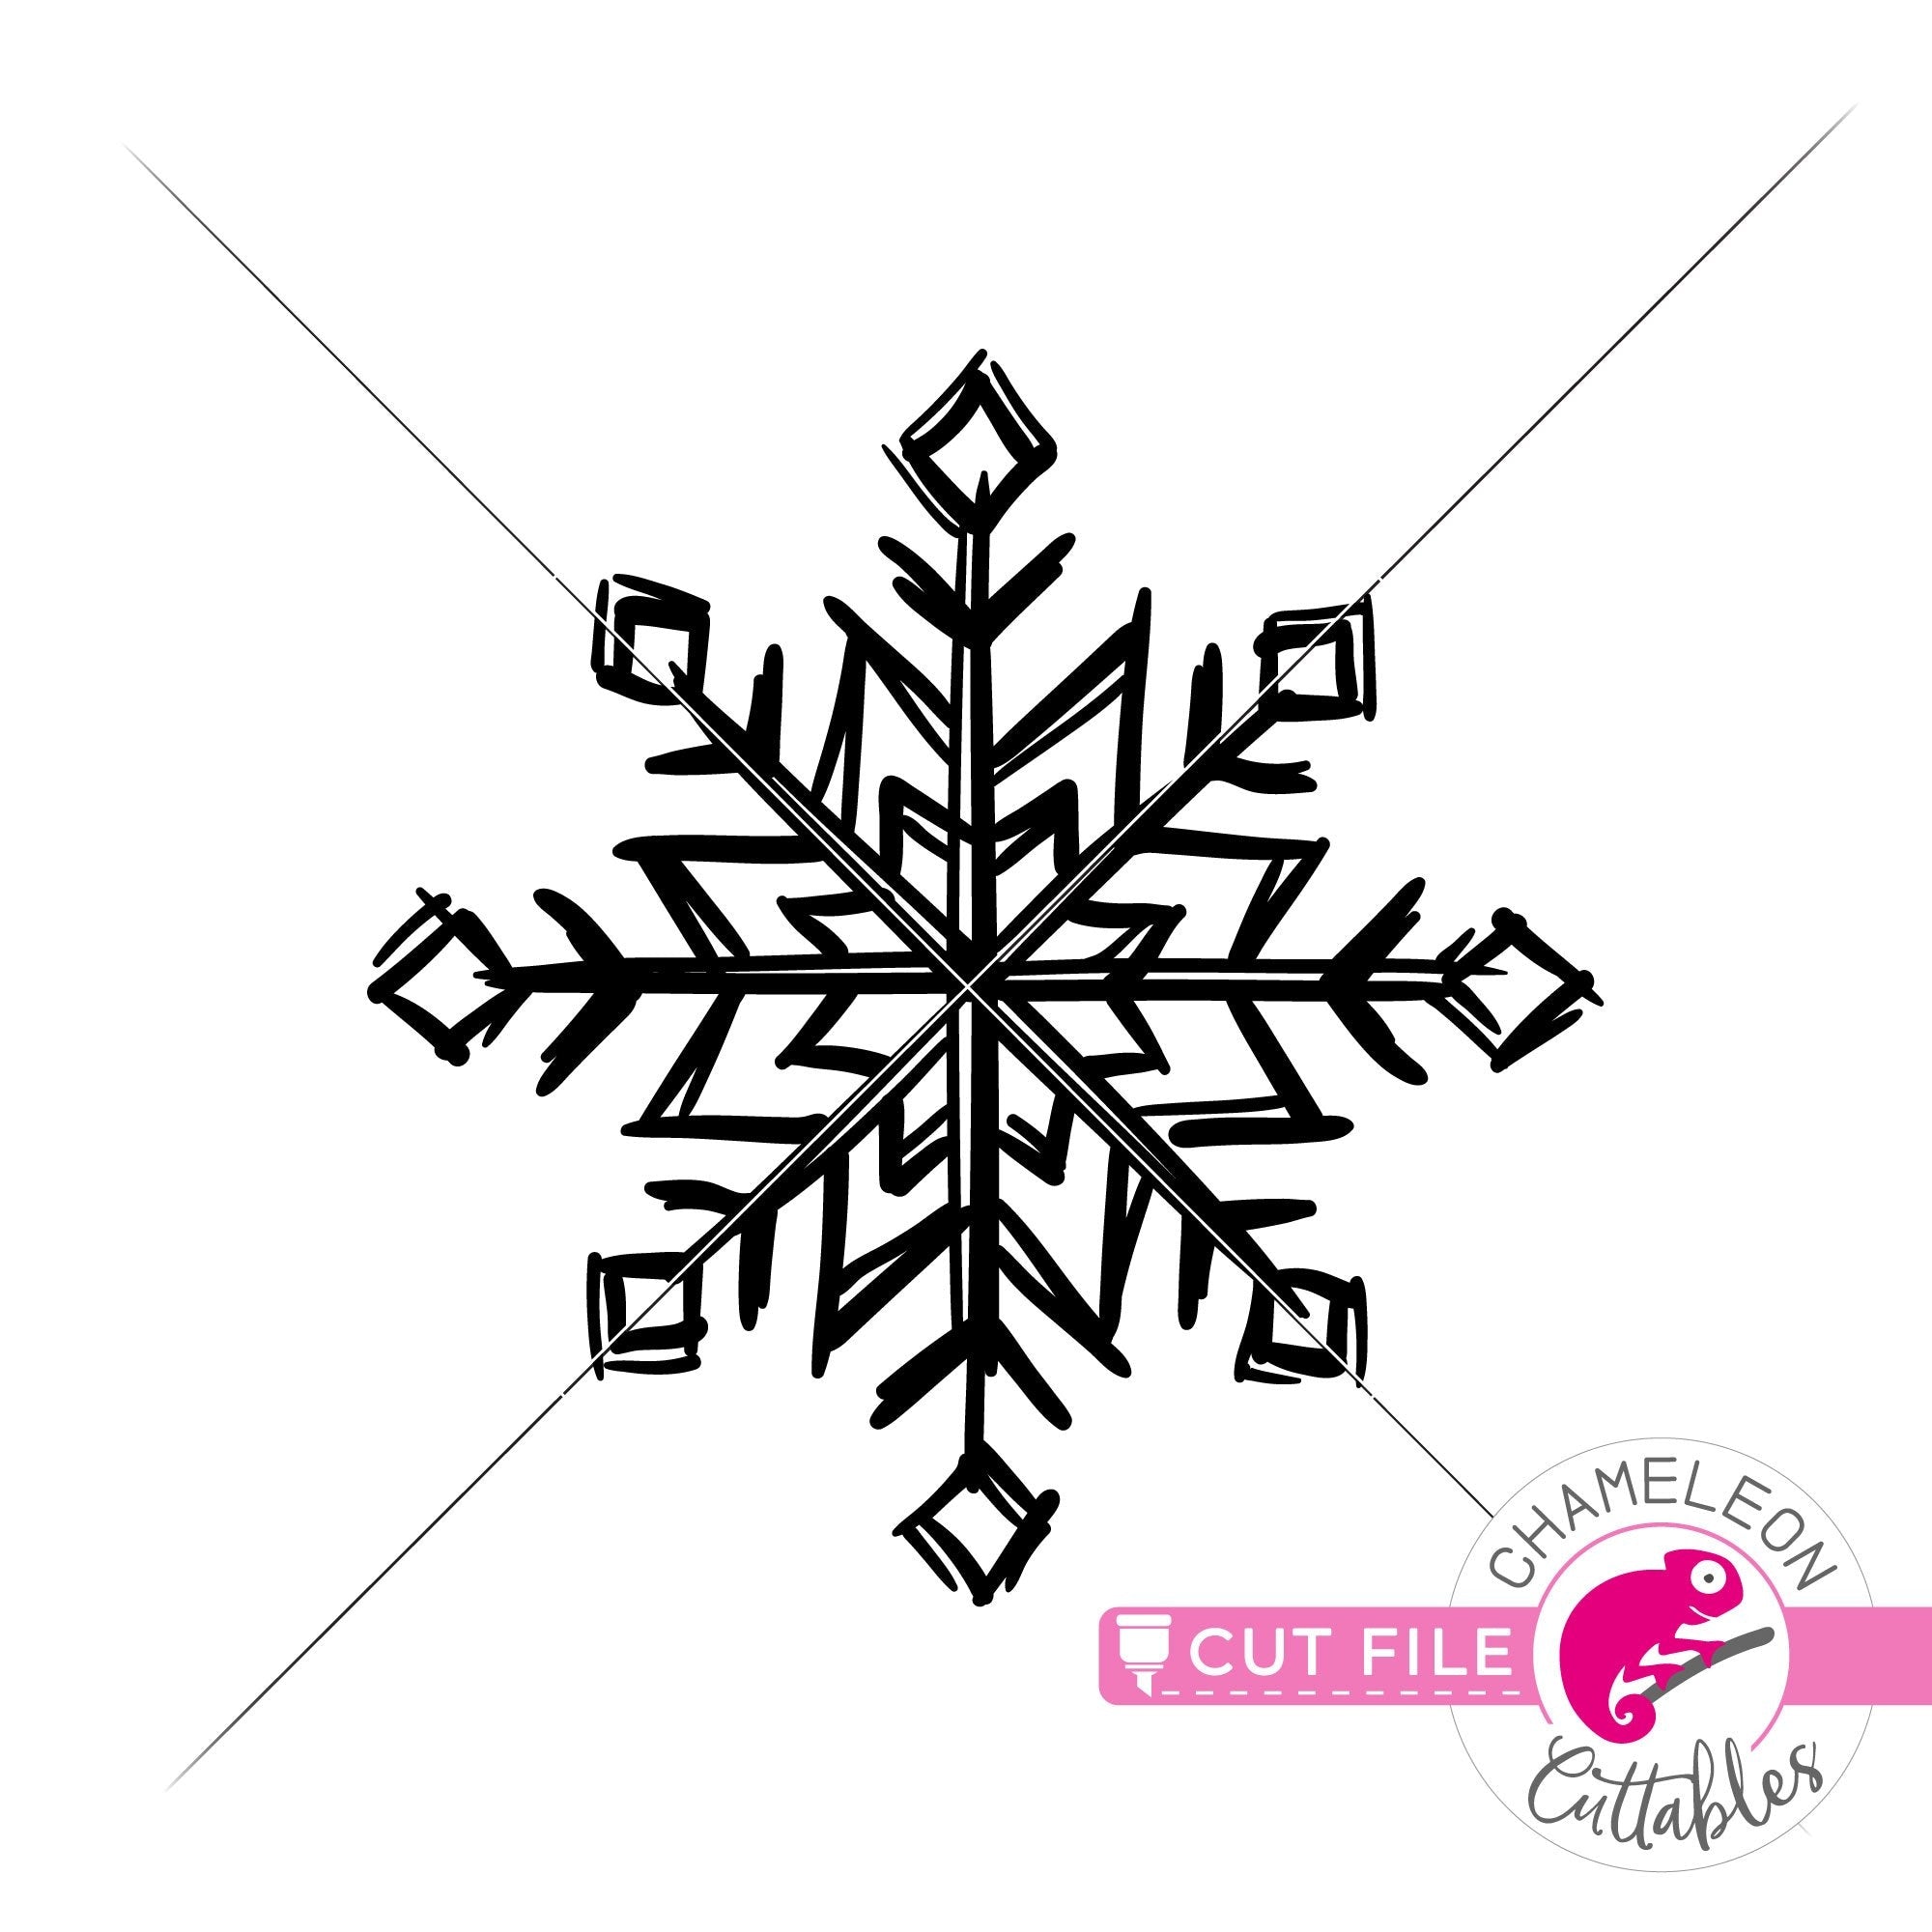 Black And White Snowflakes SVG Clipart, Snowflakes Image Digital Download,  Snowflakes Eps Png Dxf Printable, Snowflakes Vector Files